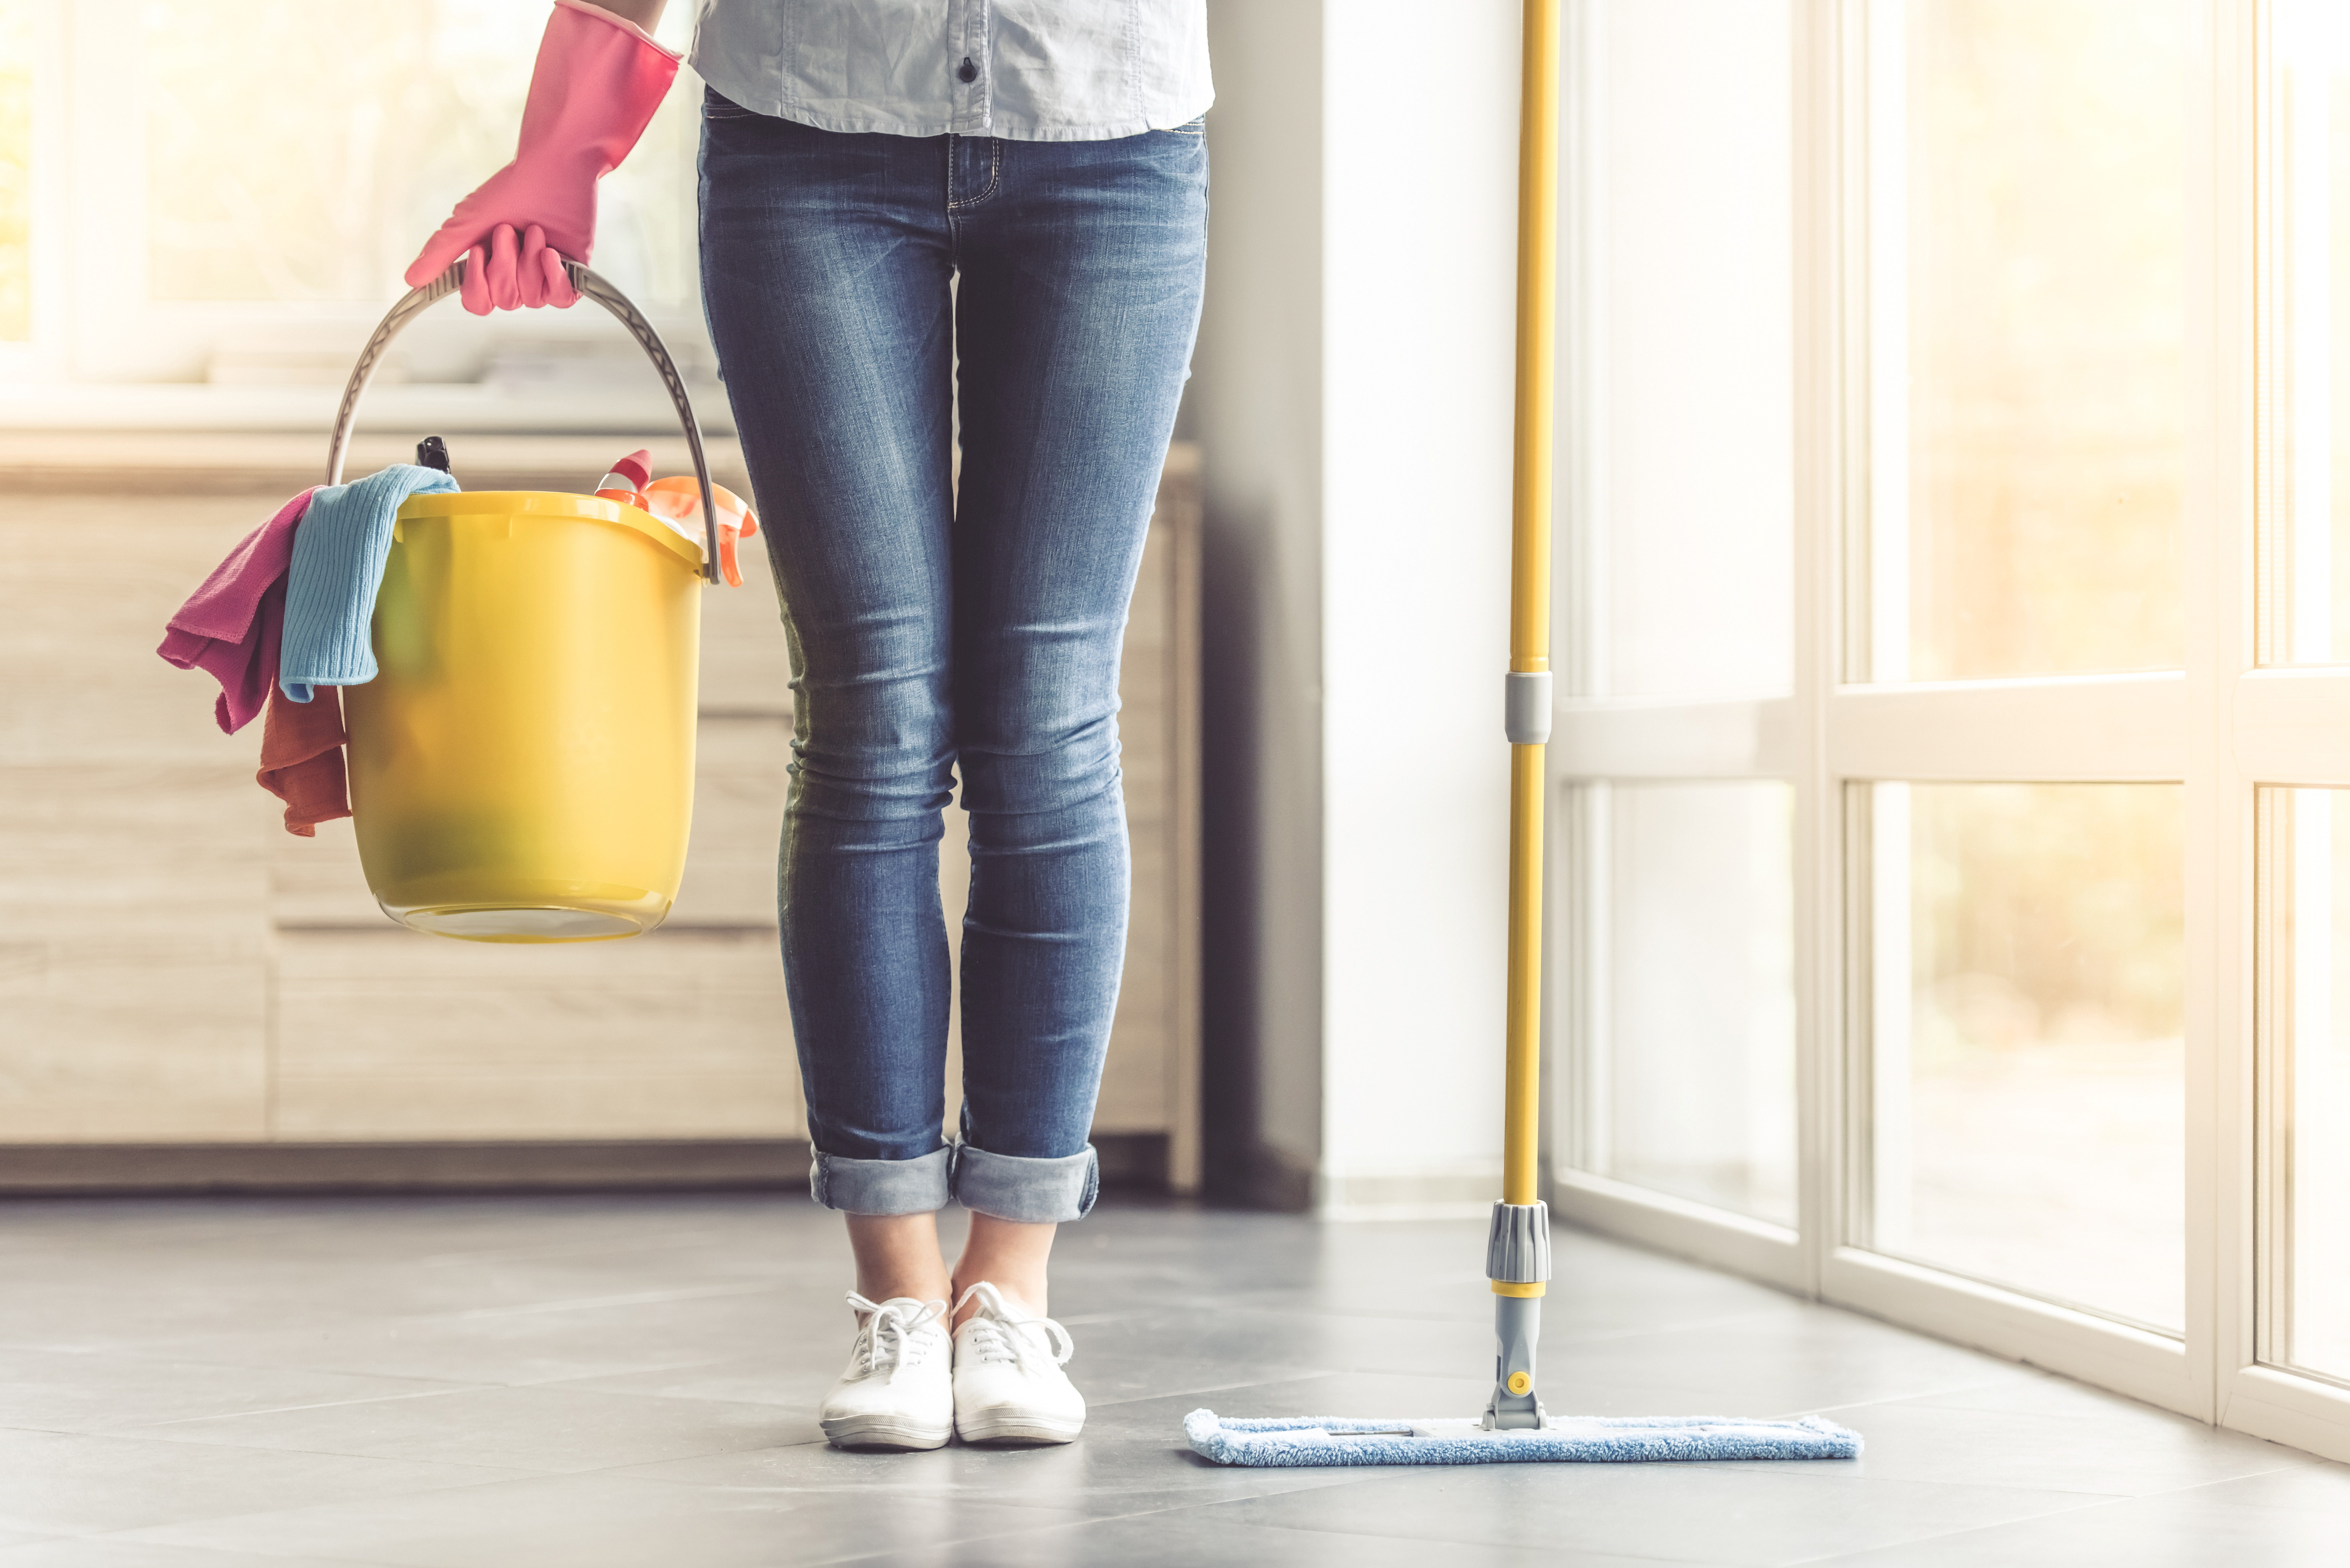 We show you how to clean your floor properly!